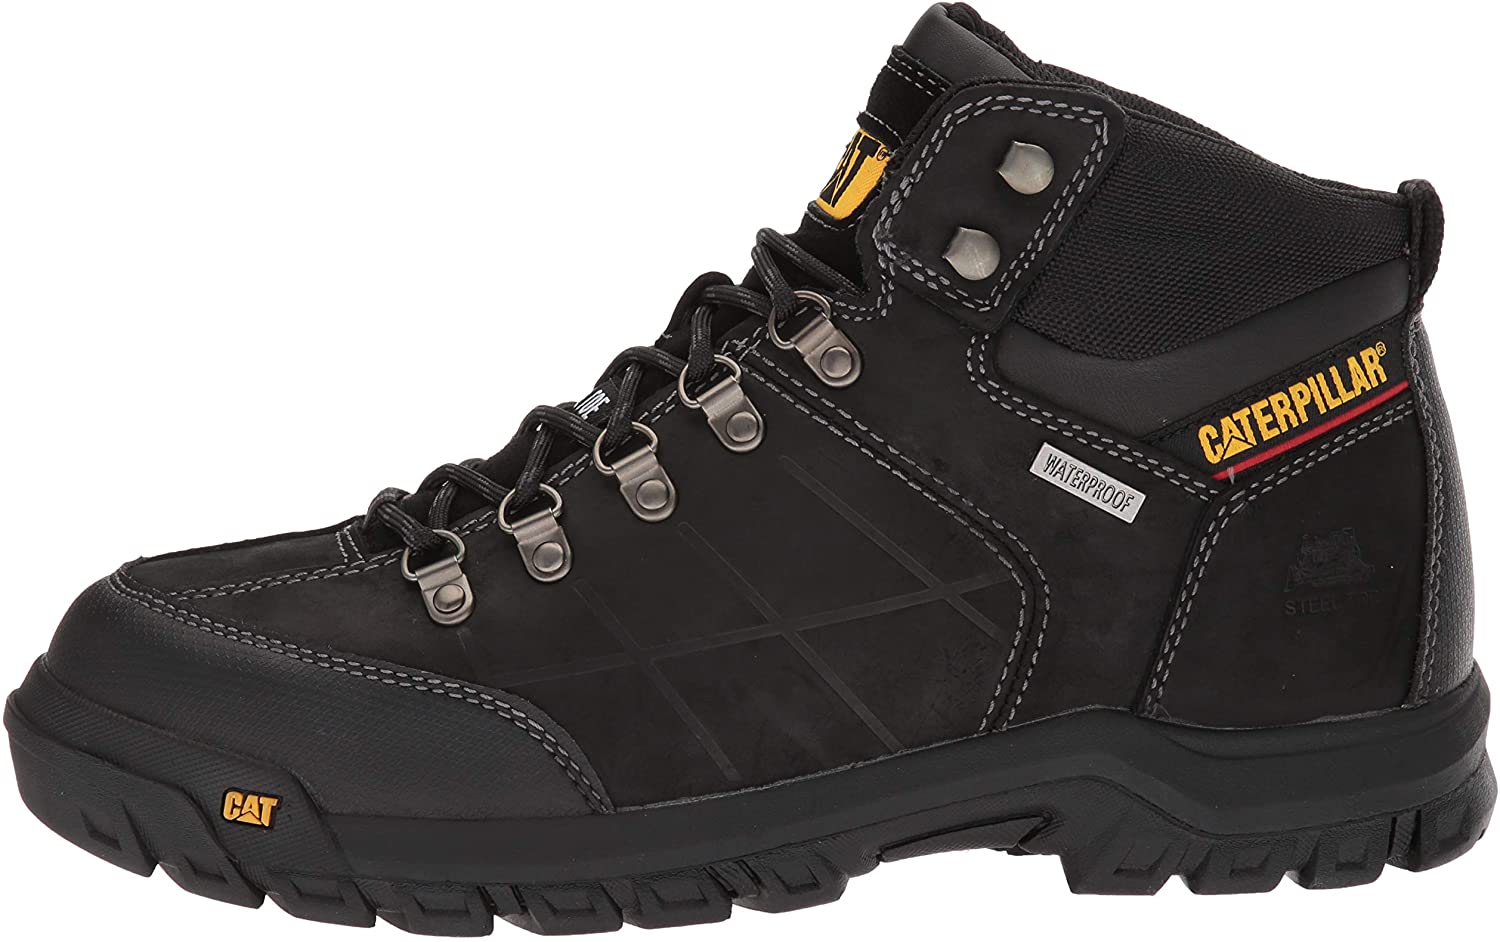 Caterpillar Men's Shoes Threshold wp st Leather Steel toe Lace, Black ...